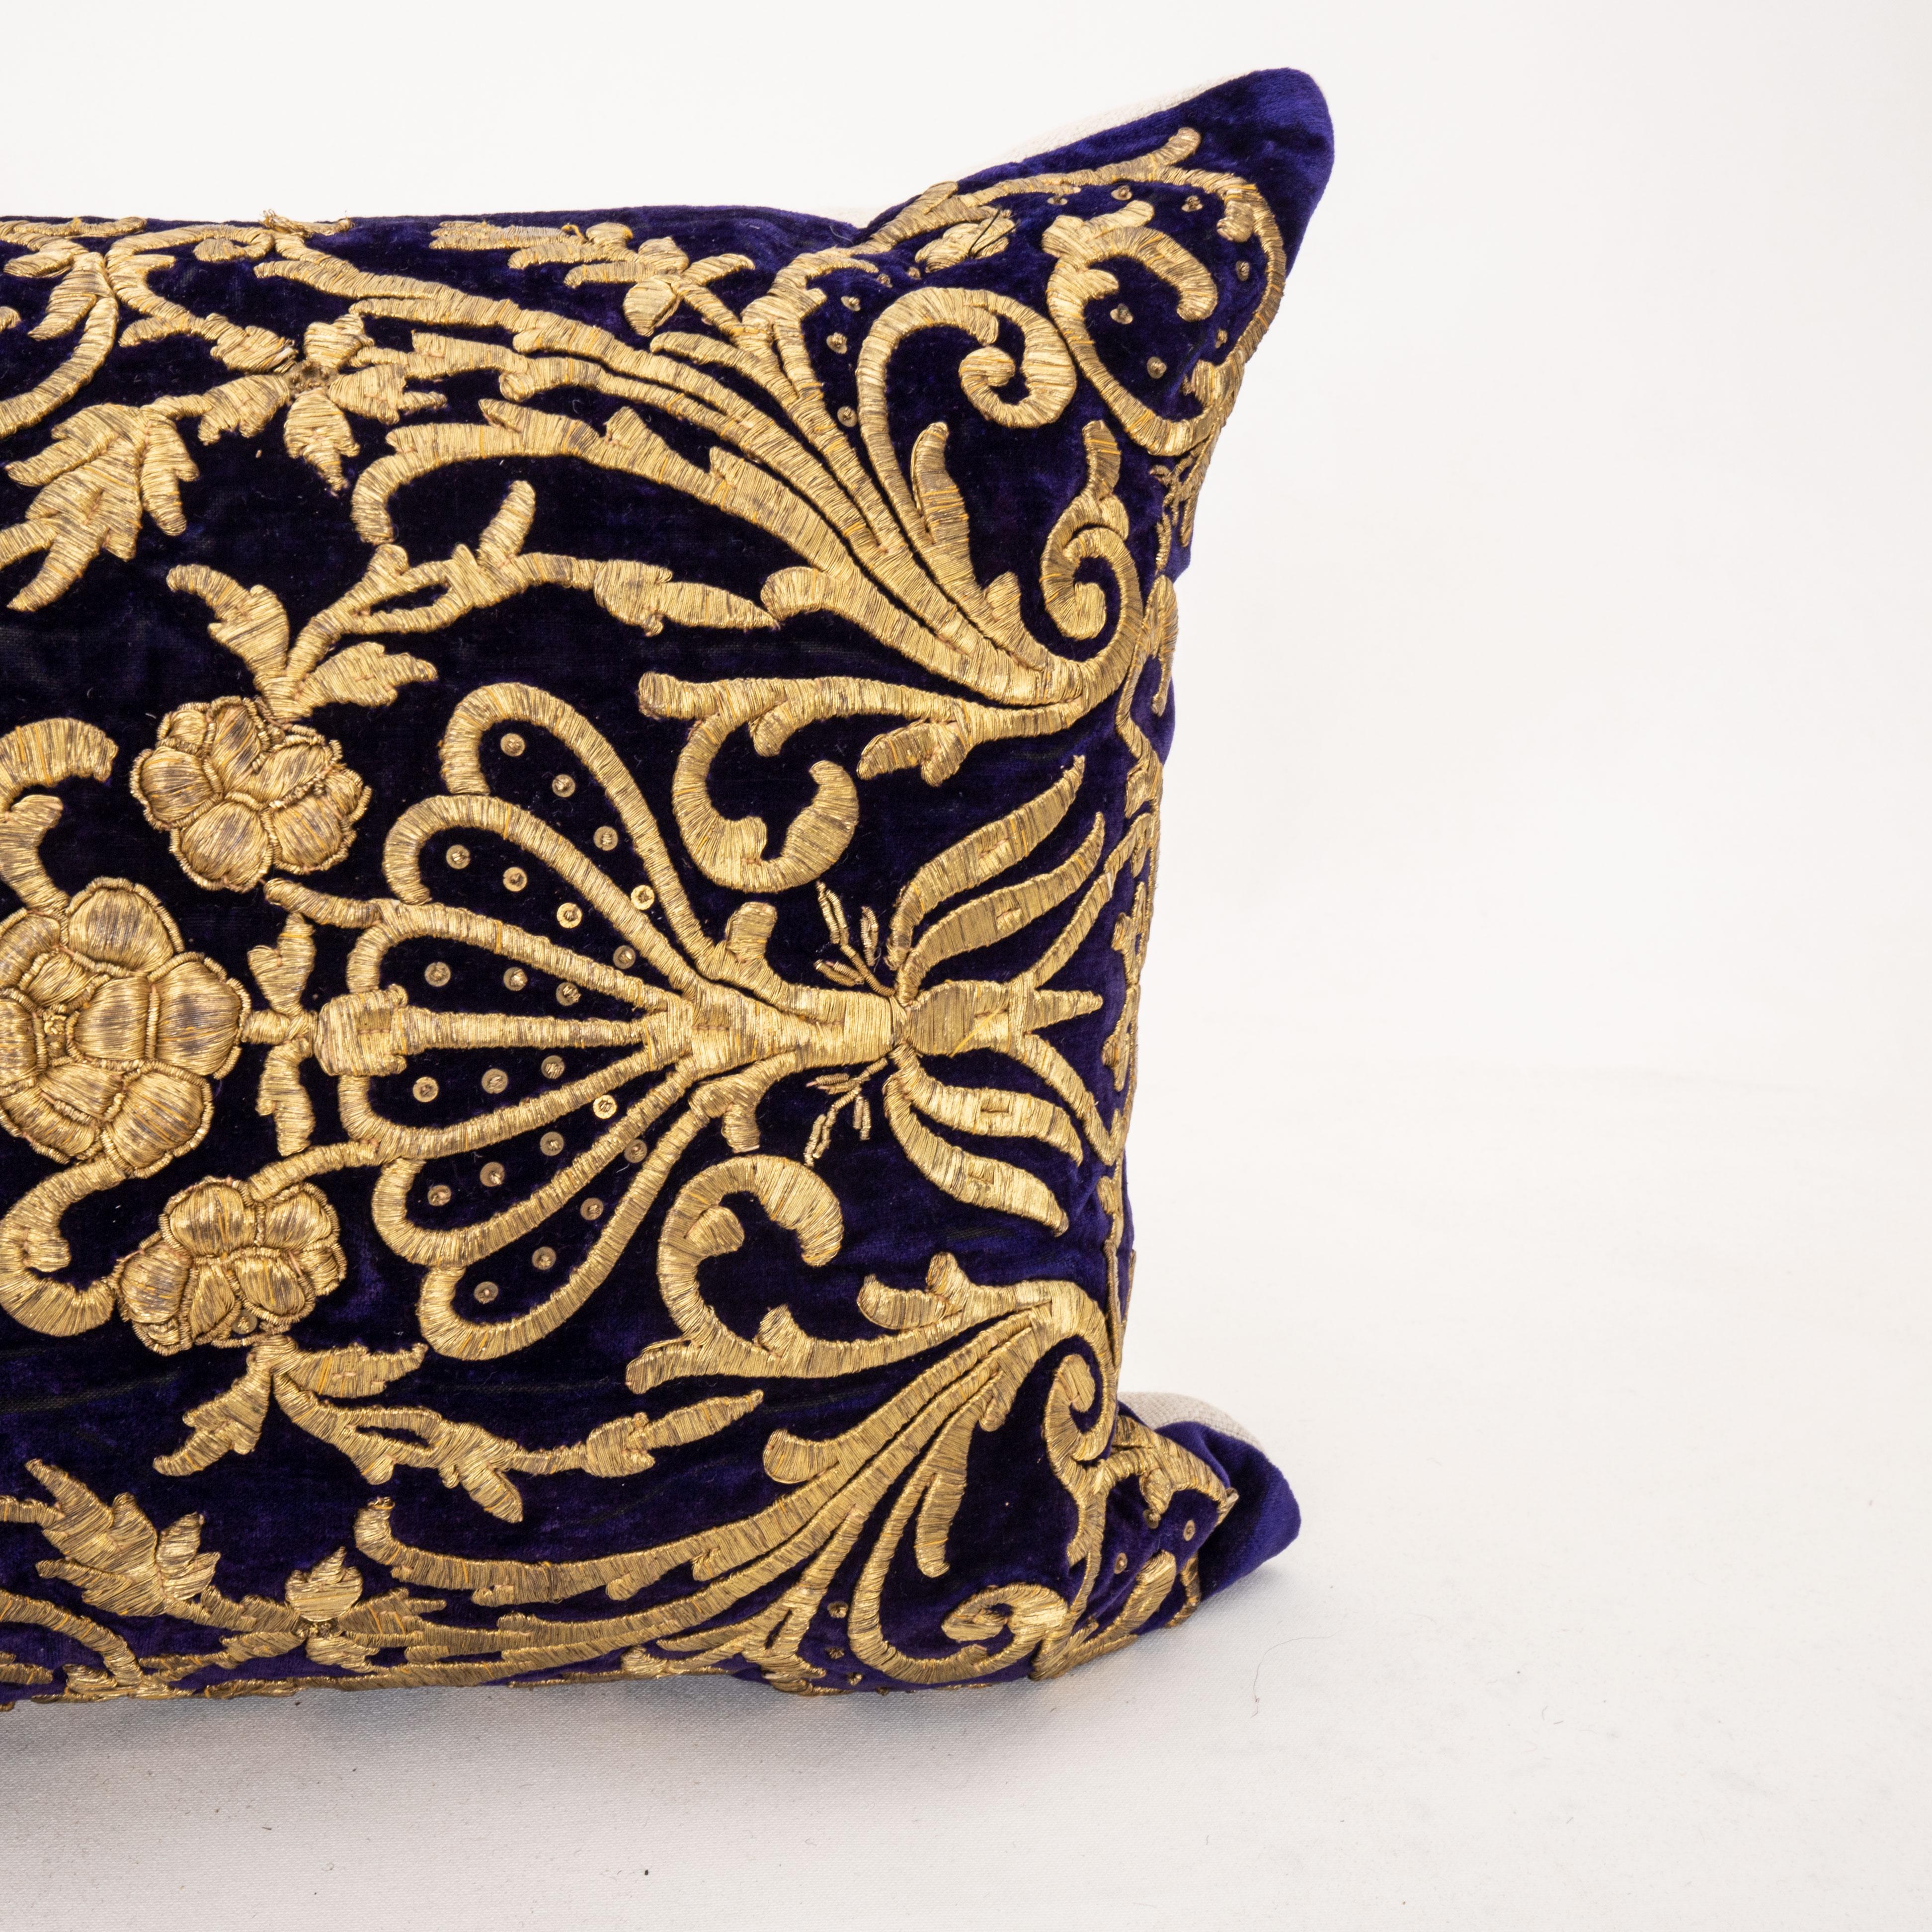 20th Century Ottoman / Turkish Pillow Cover in Sarma Technique, late 19th / Early 20th C. For Sale